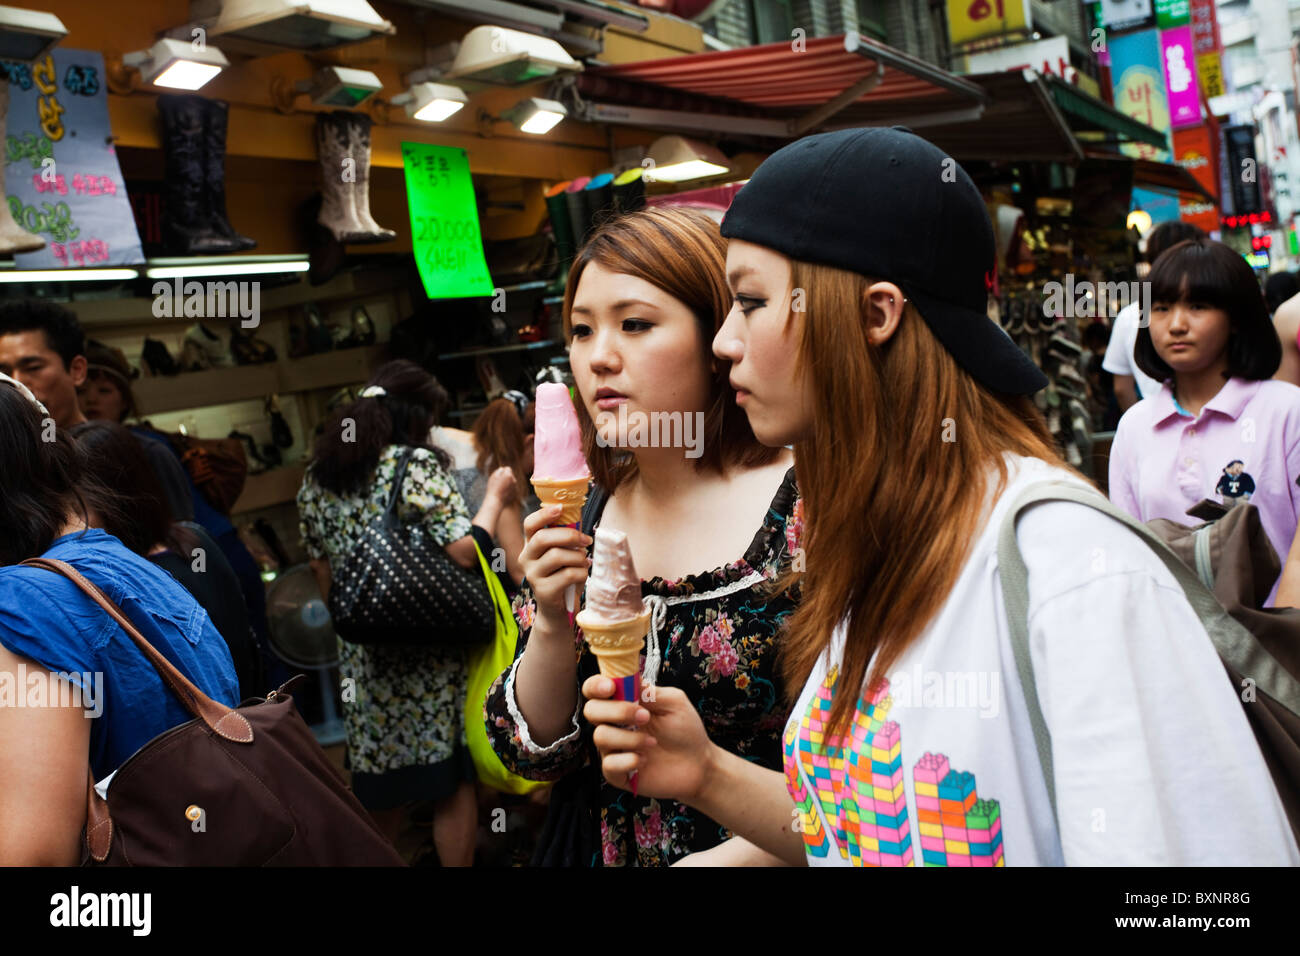 Girls with ice cream in a popular shopping area of Seoul, South Korea Stock Photo